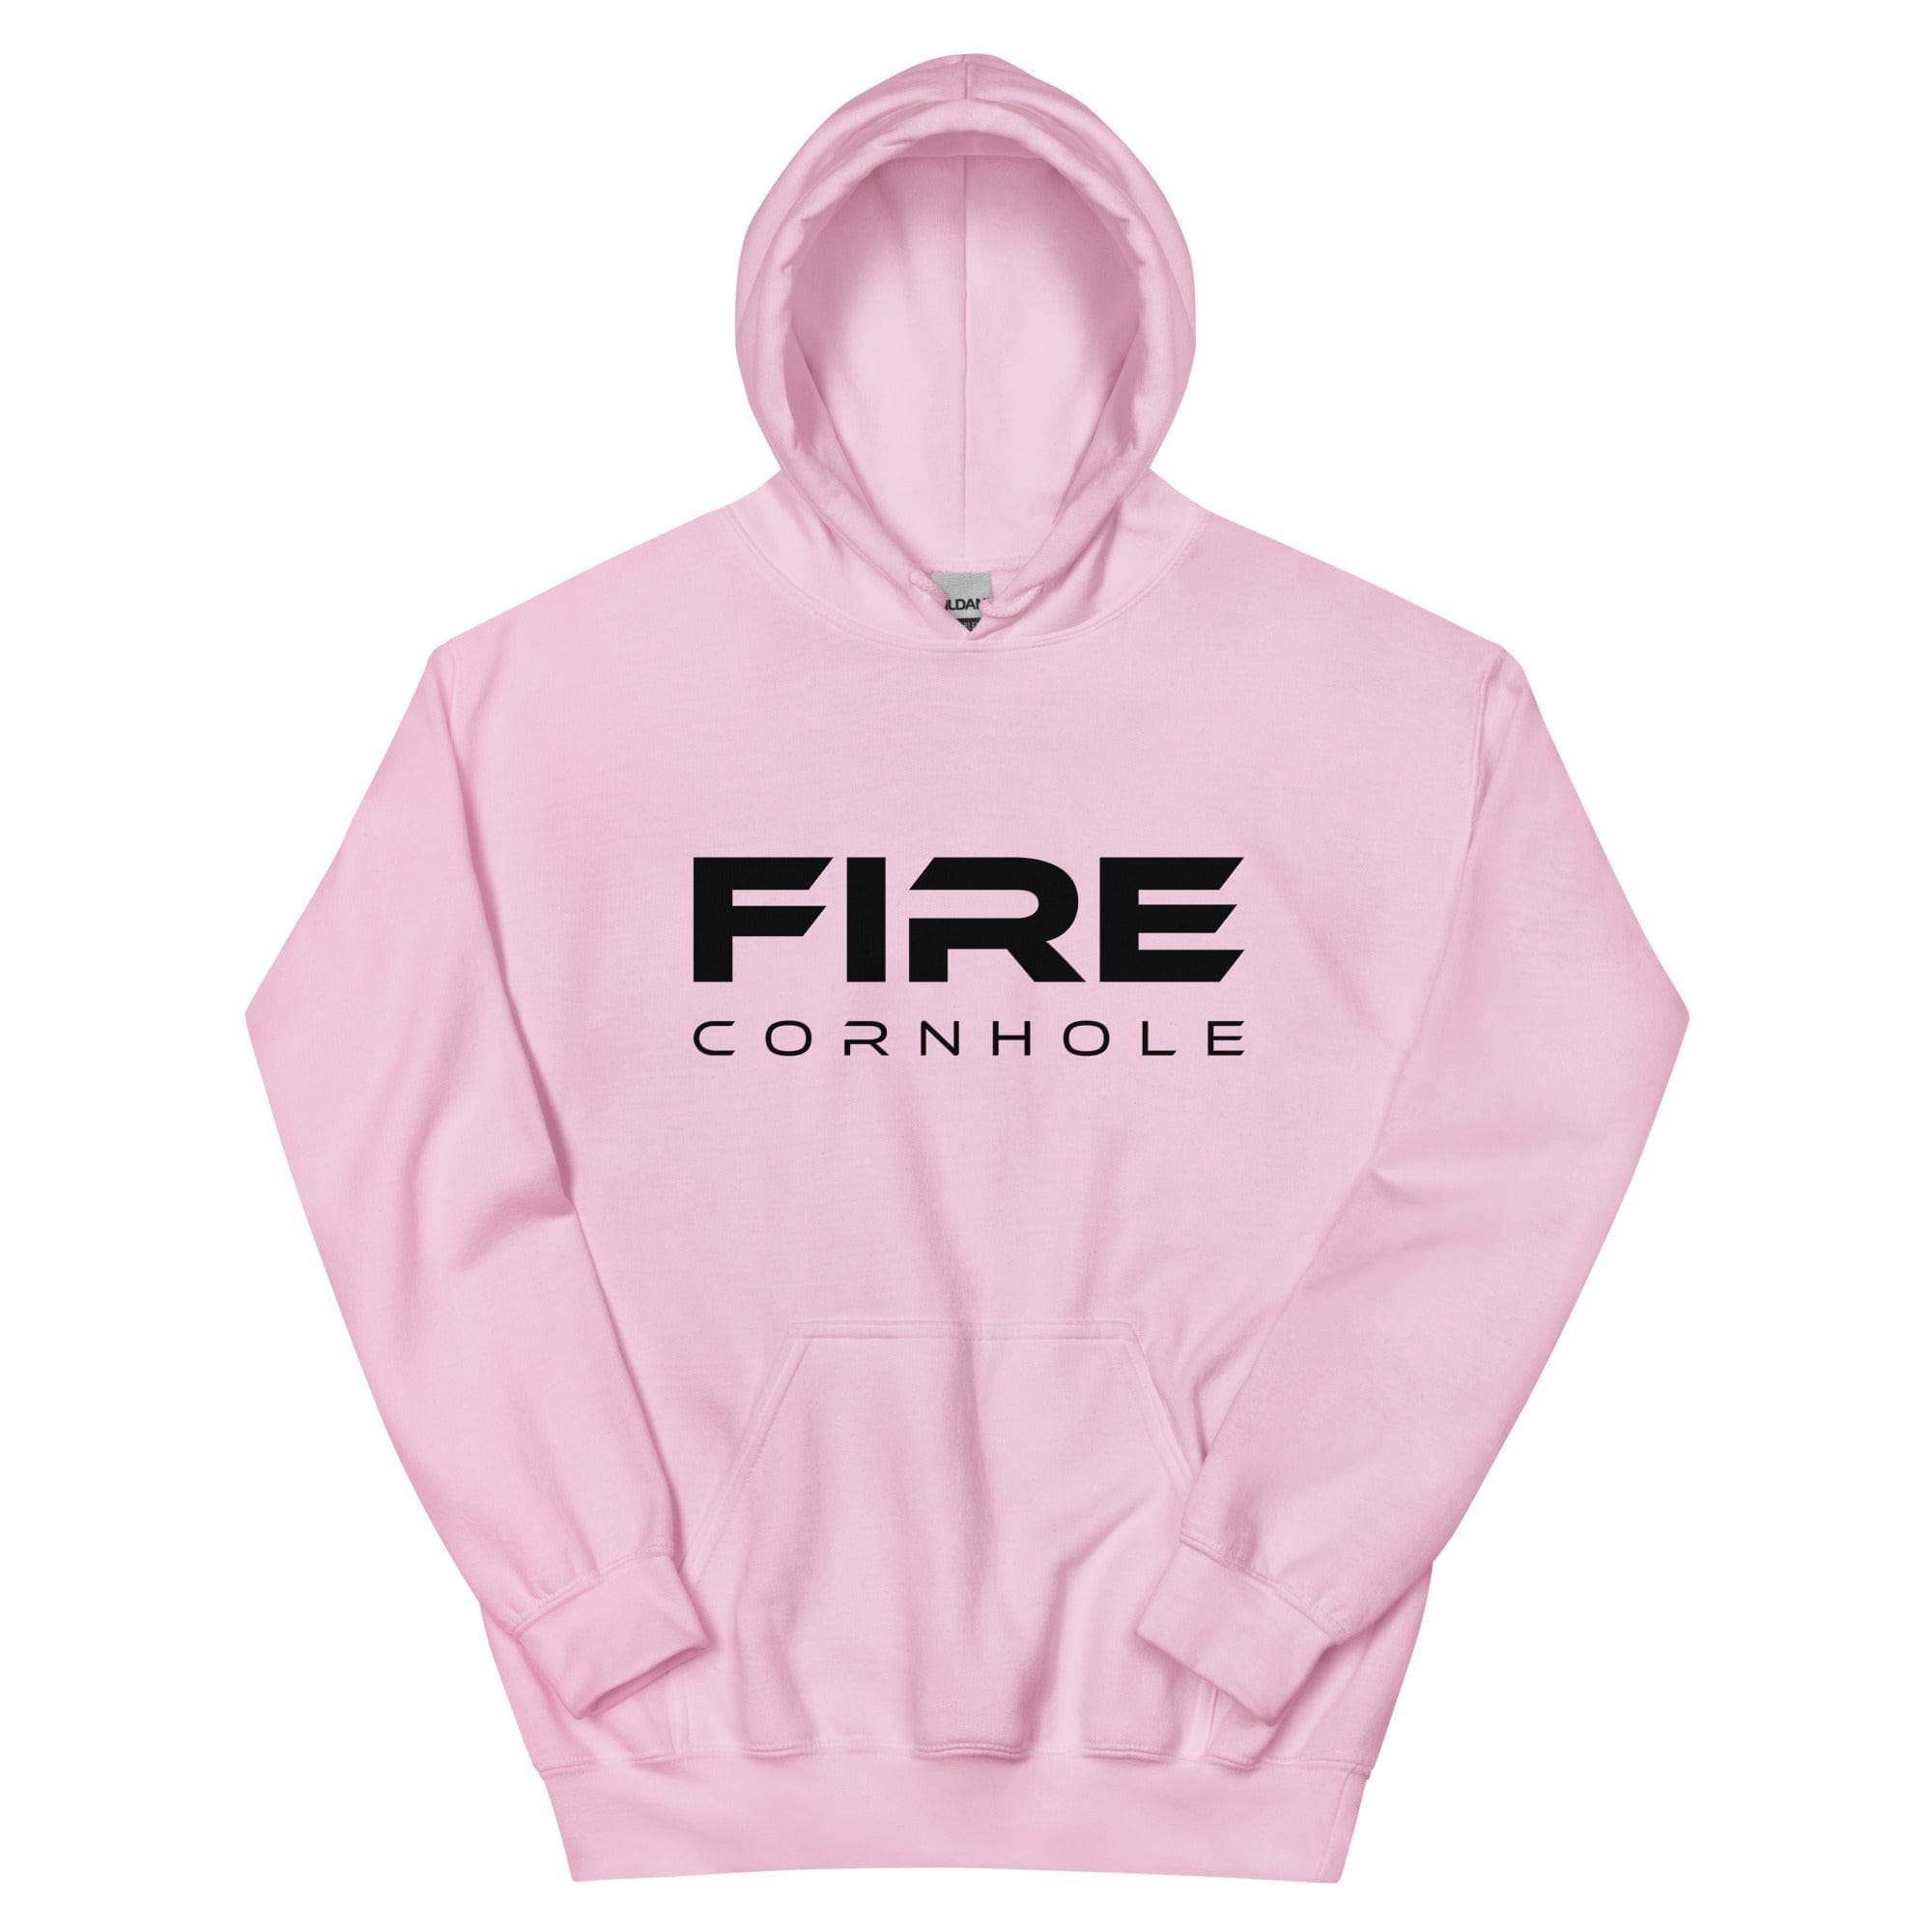 Pink unisex cotton hoodie with Fire Cornhole logo in black